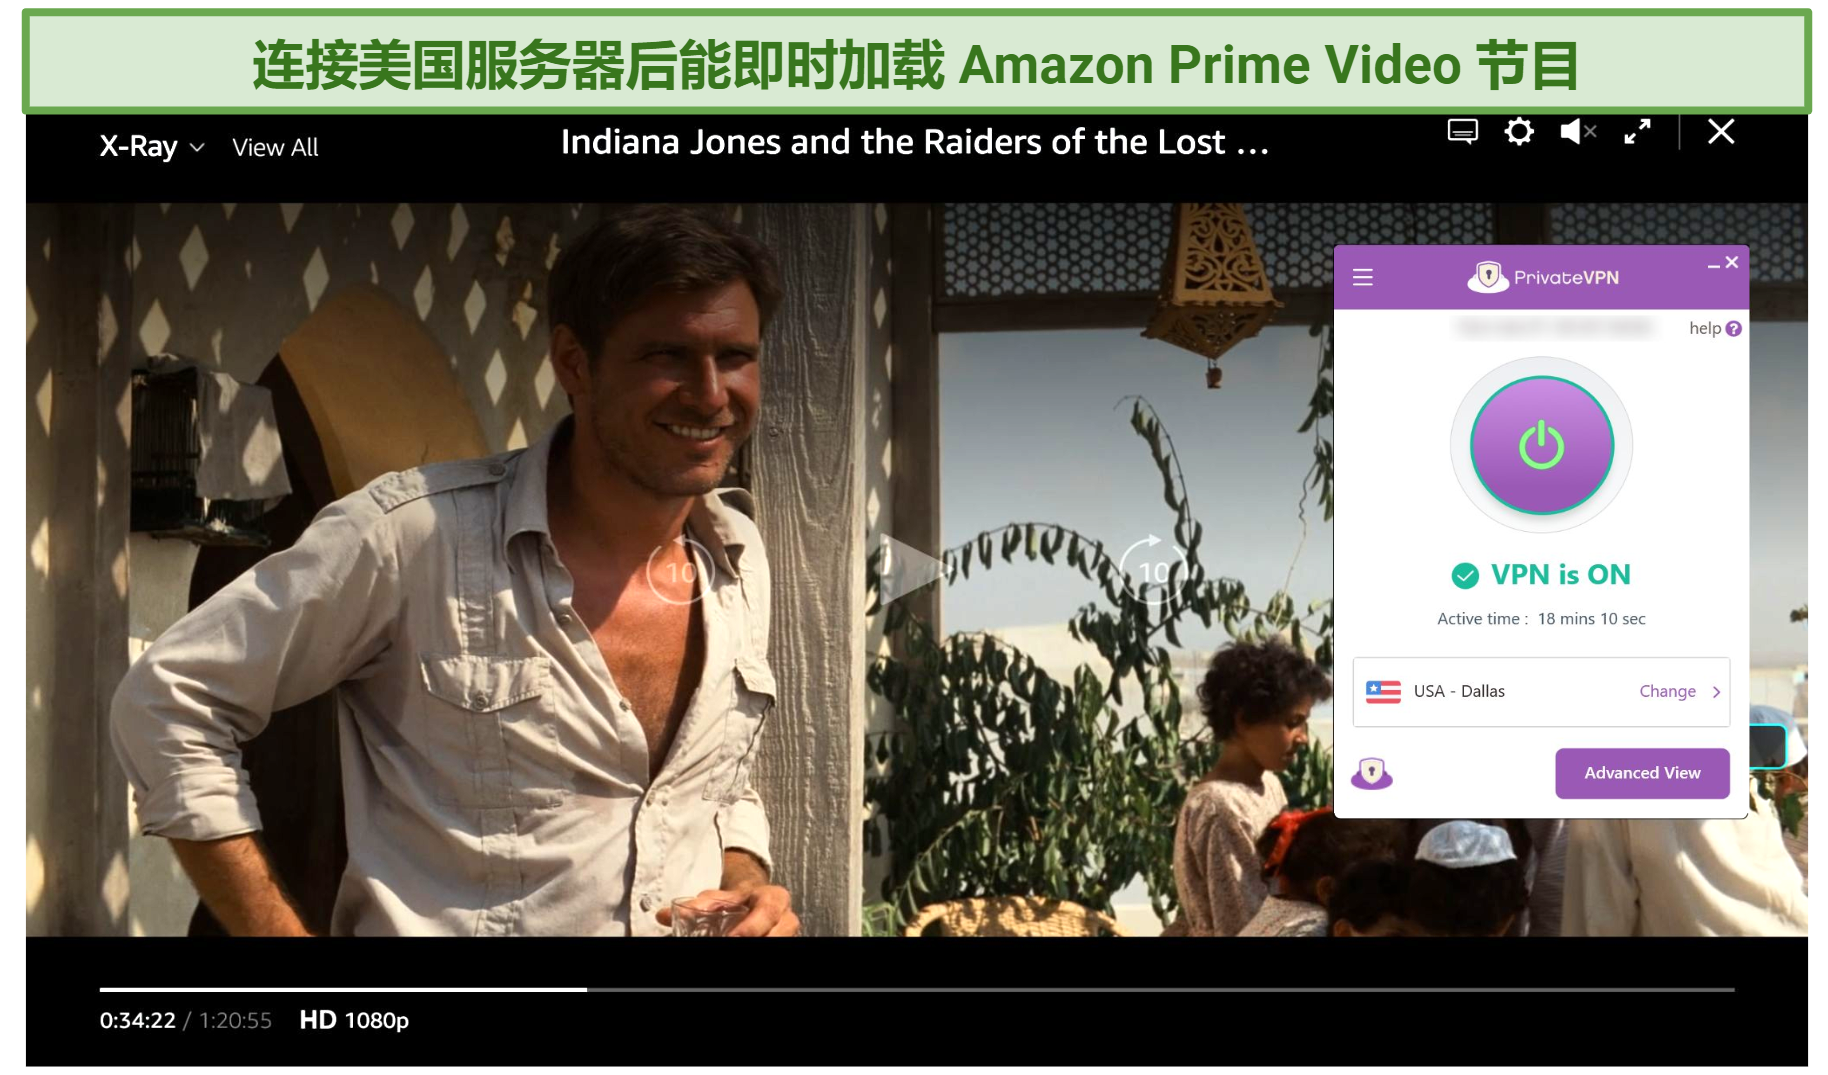 Screenshot of Amazon Prime Video player streaming Indiana Jones: Raiders of the Lost Ark while connected to PrivateVPN